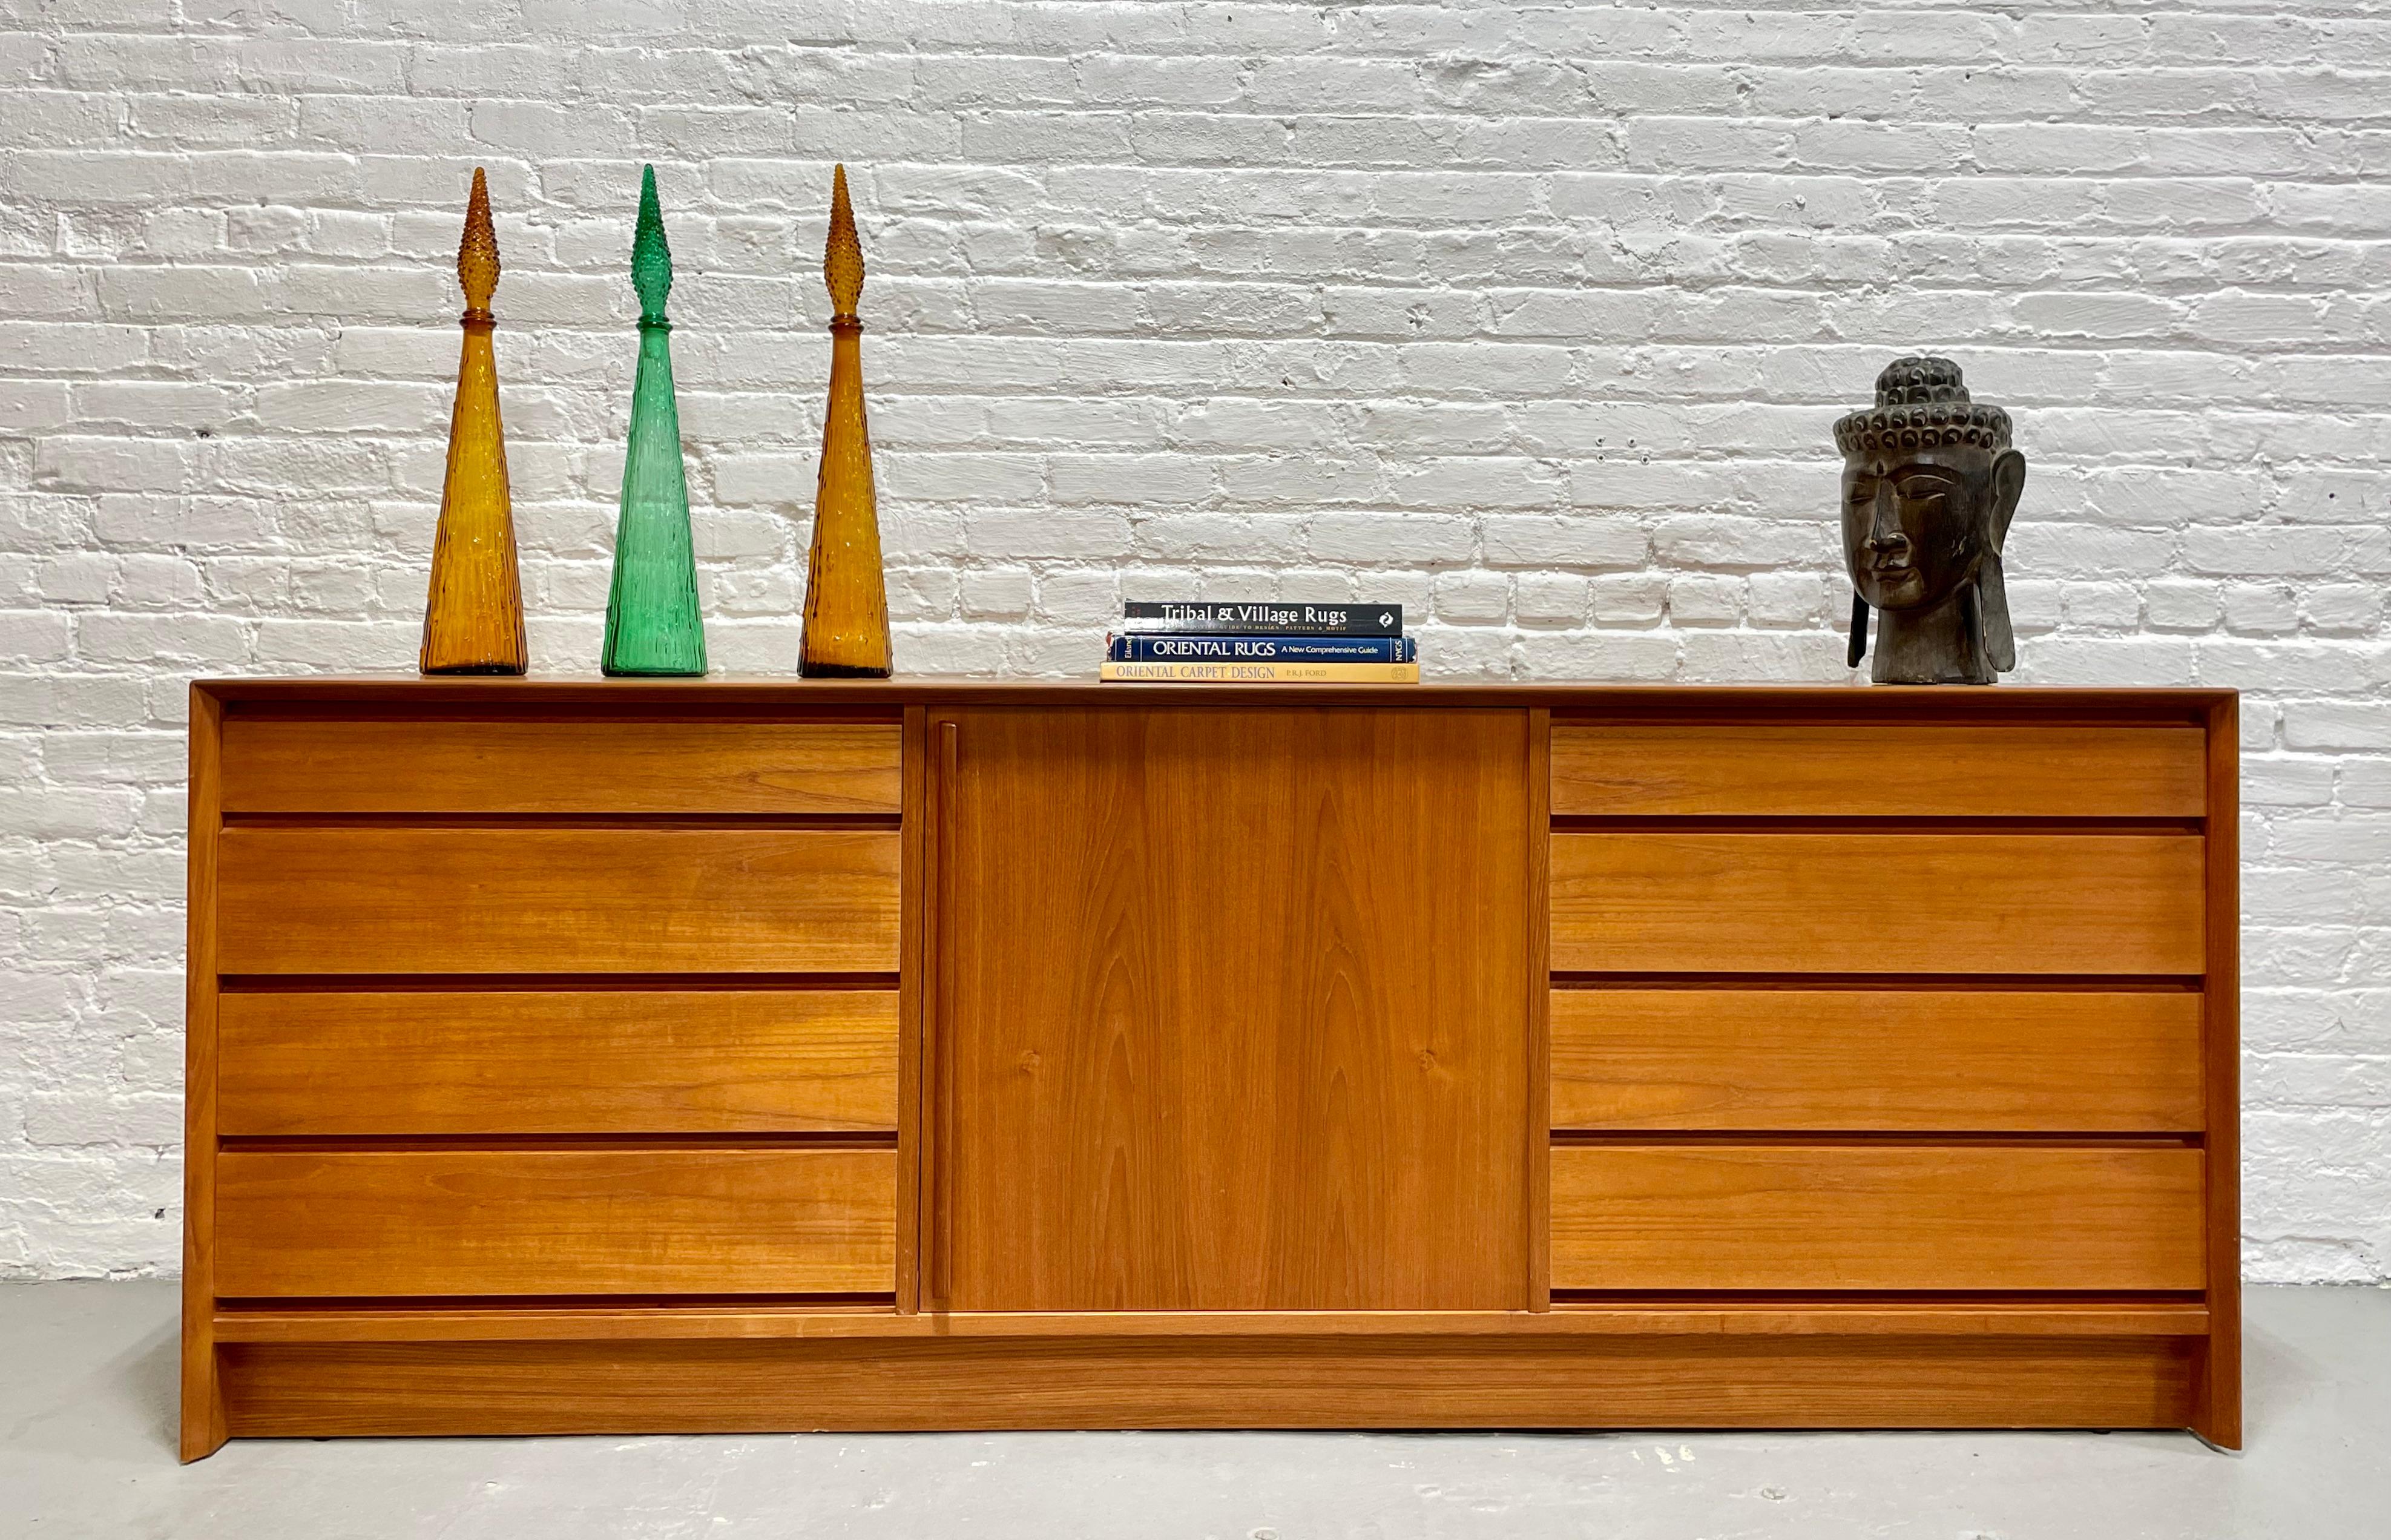 Spectacular Mid Century Modern Teak Long Dresser / Credenza by Falster Mobelfabrik, Made in Denmark, c. 1960’s. Crafted of old-growth teak and boasting 13 drawers for all your storage needs. The left and right sides features four drawers each with